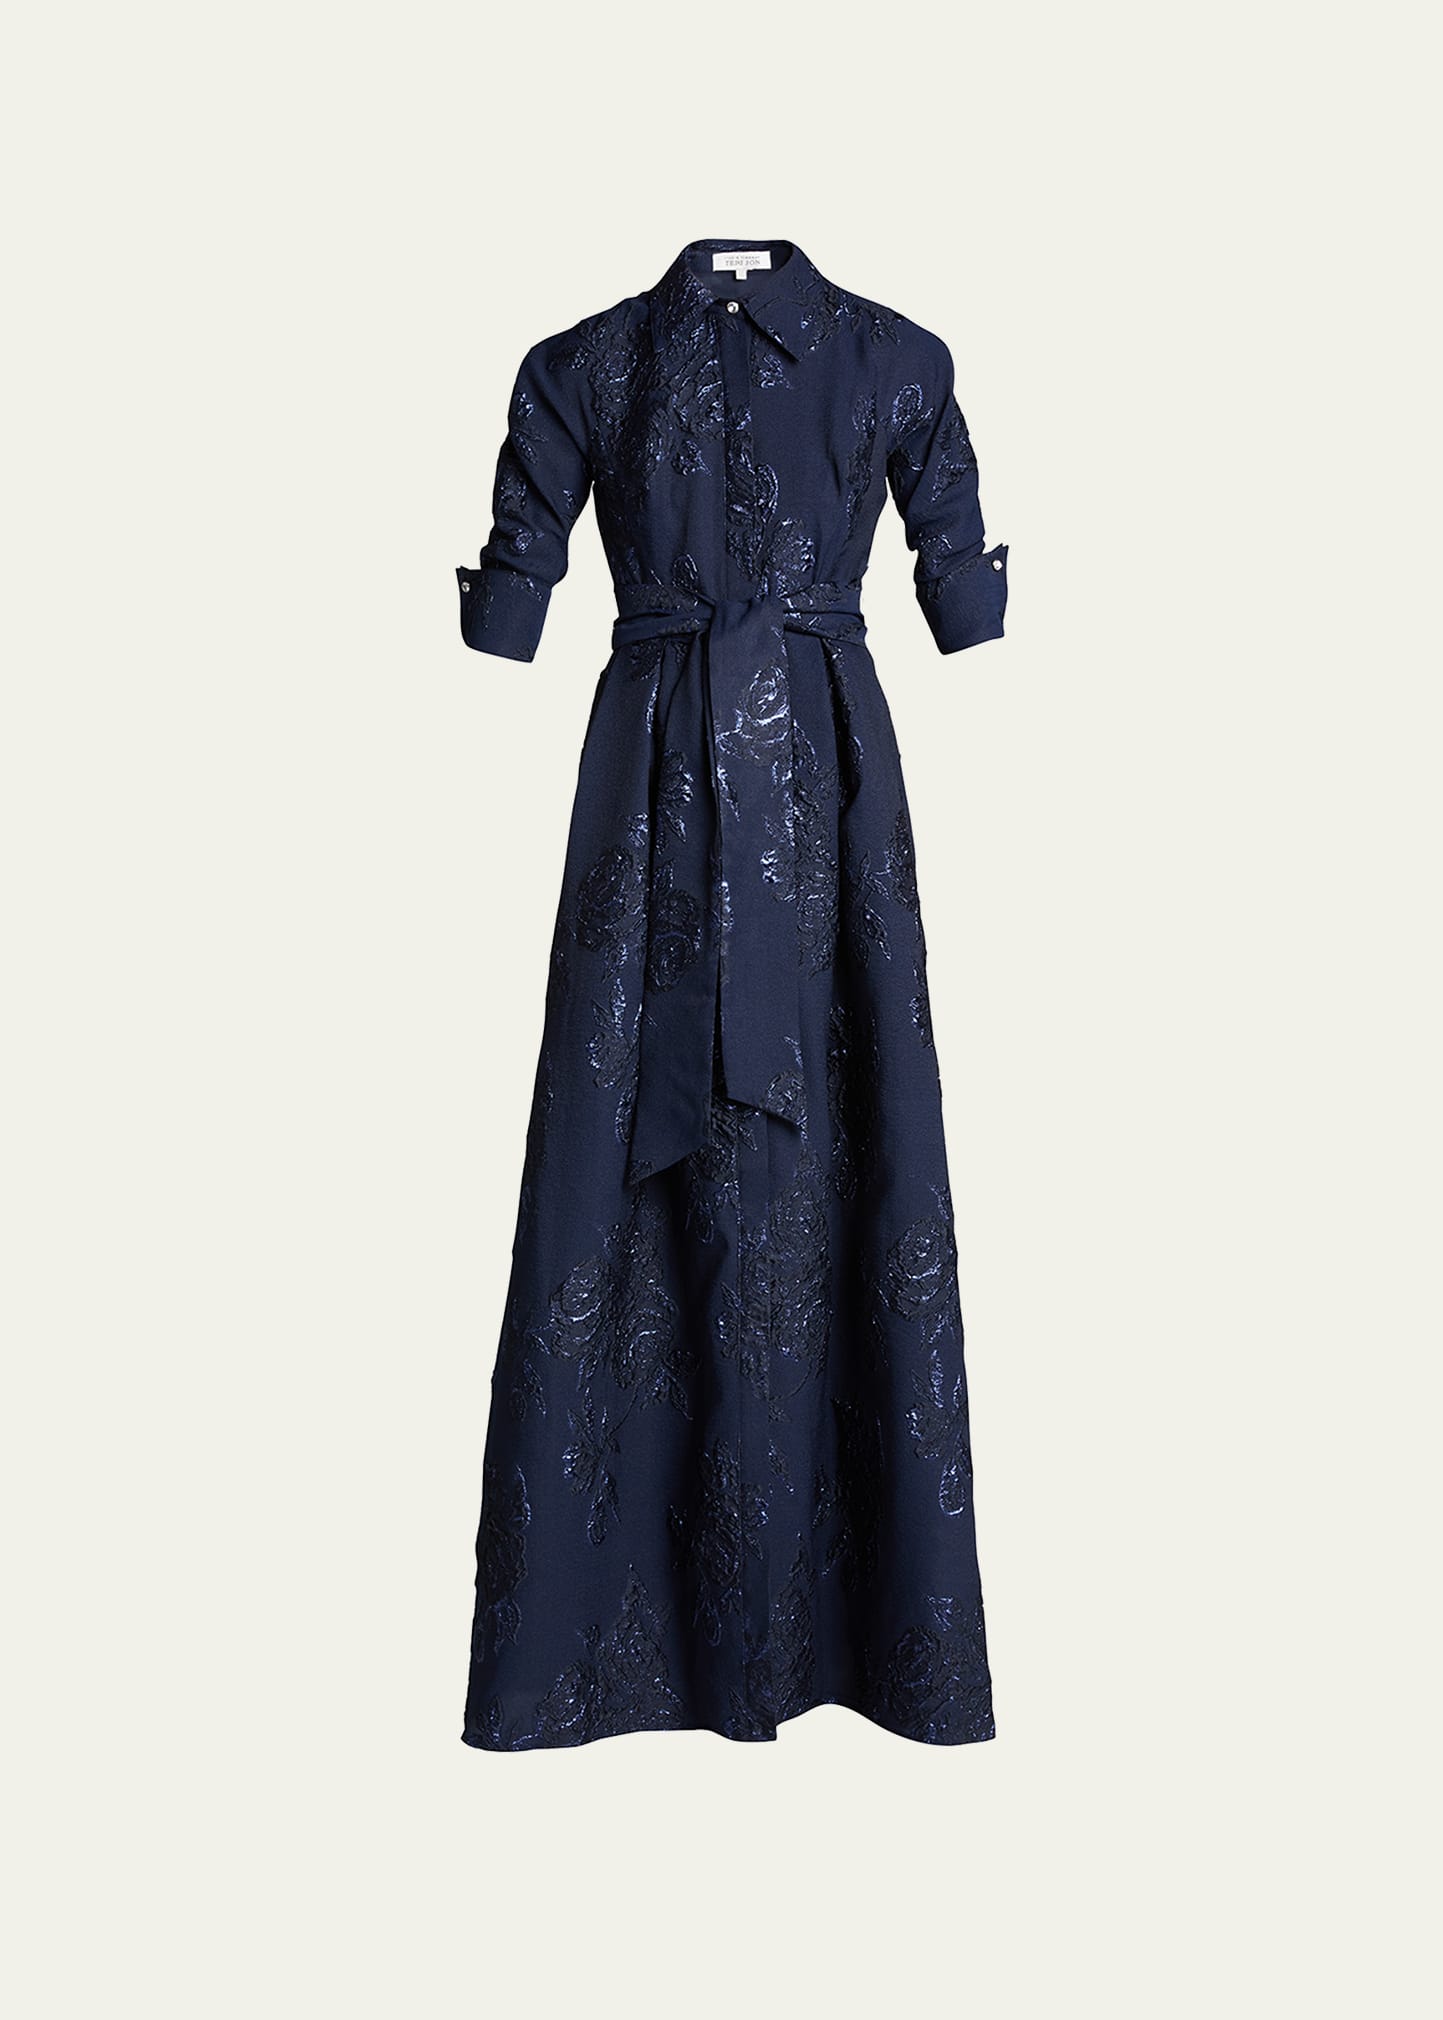 Belted Jacquard Shirtdress Gown